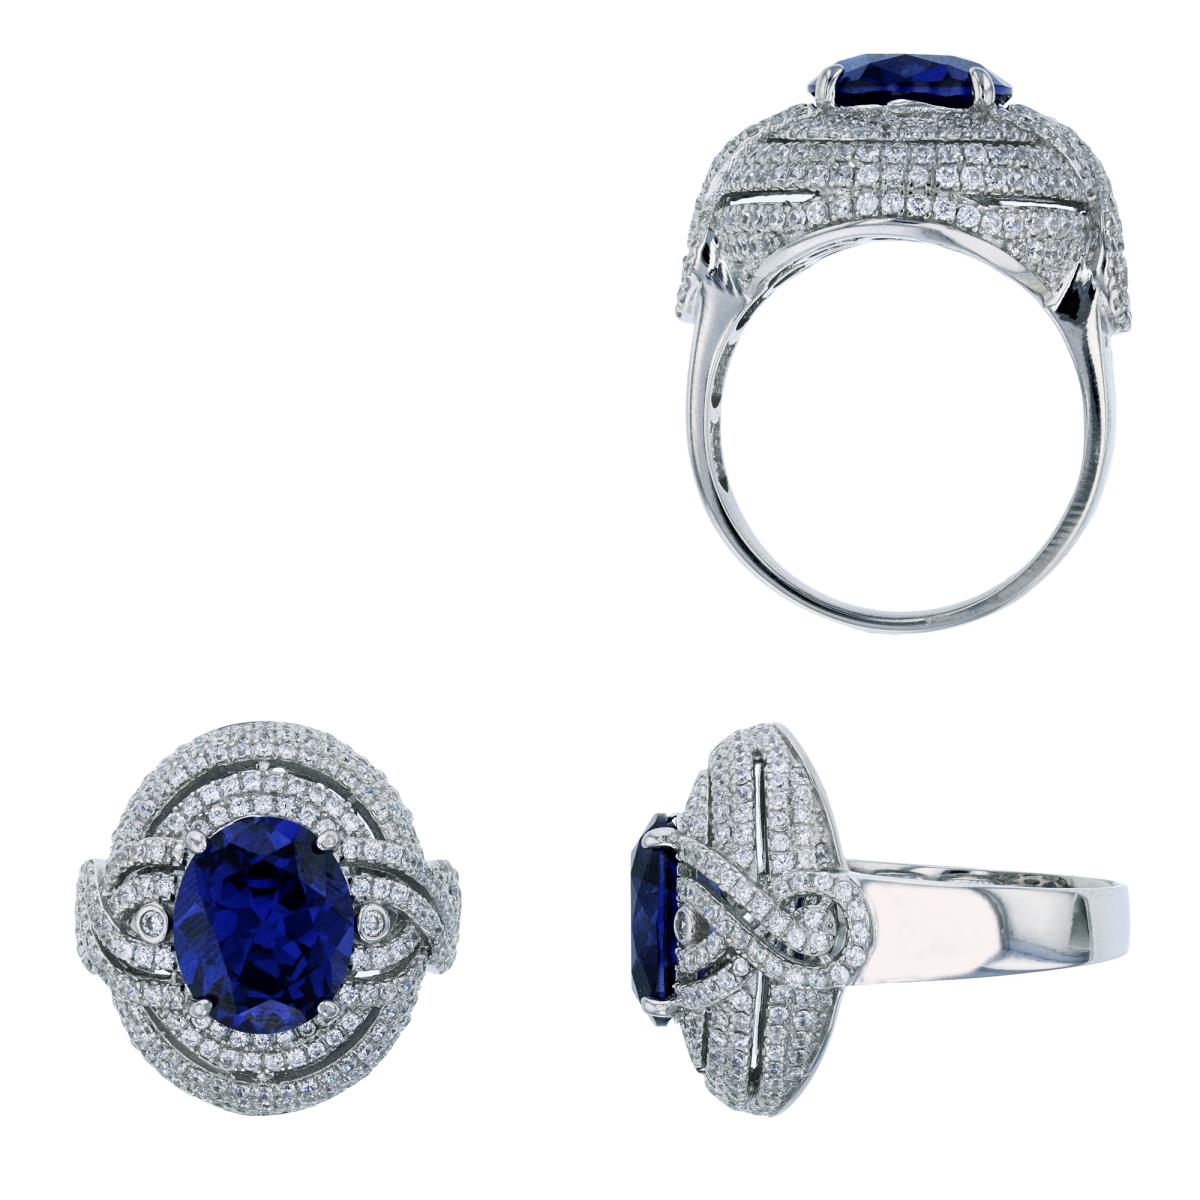 Sterling Silver Rhodium 12x10mm Oval Cut Tanzanite & Micropave Multi-Rows Domed Engagement Ring